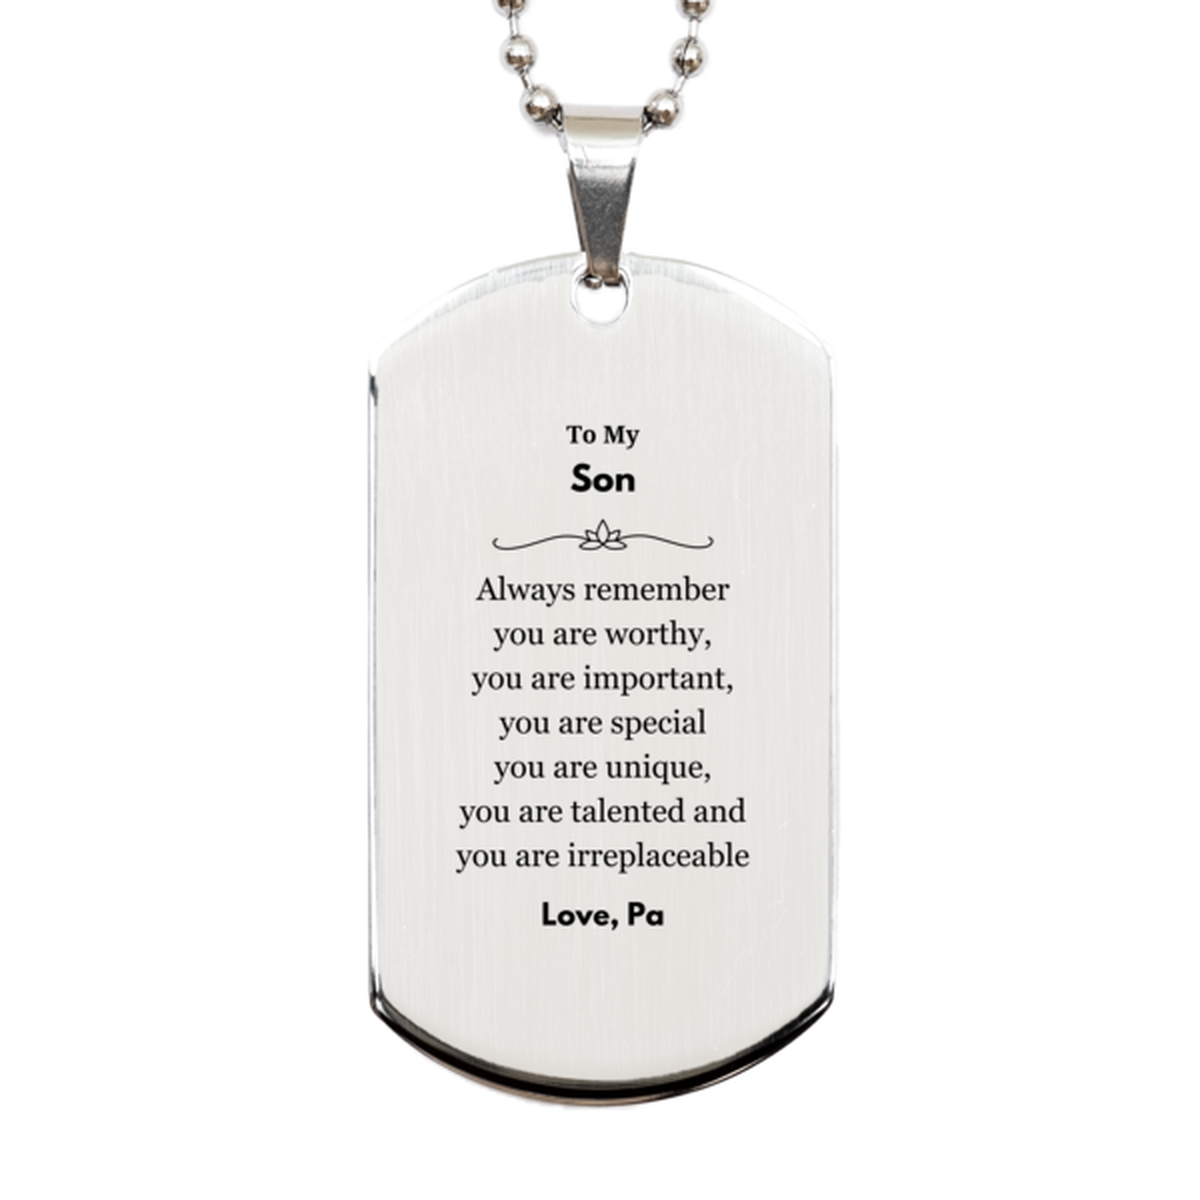 Son Birthday Gifts from Pa, Inspirational Silver Dog Tag for Son Christmas Graduation Gifts for Son Always remember you are worthy, you are important. Love, Pa